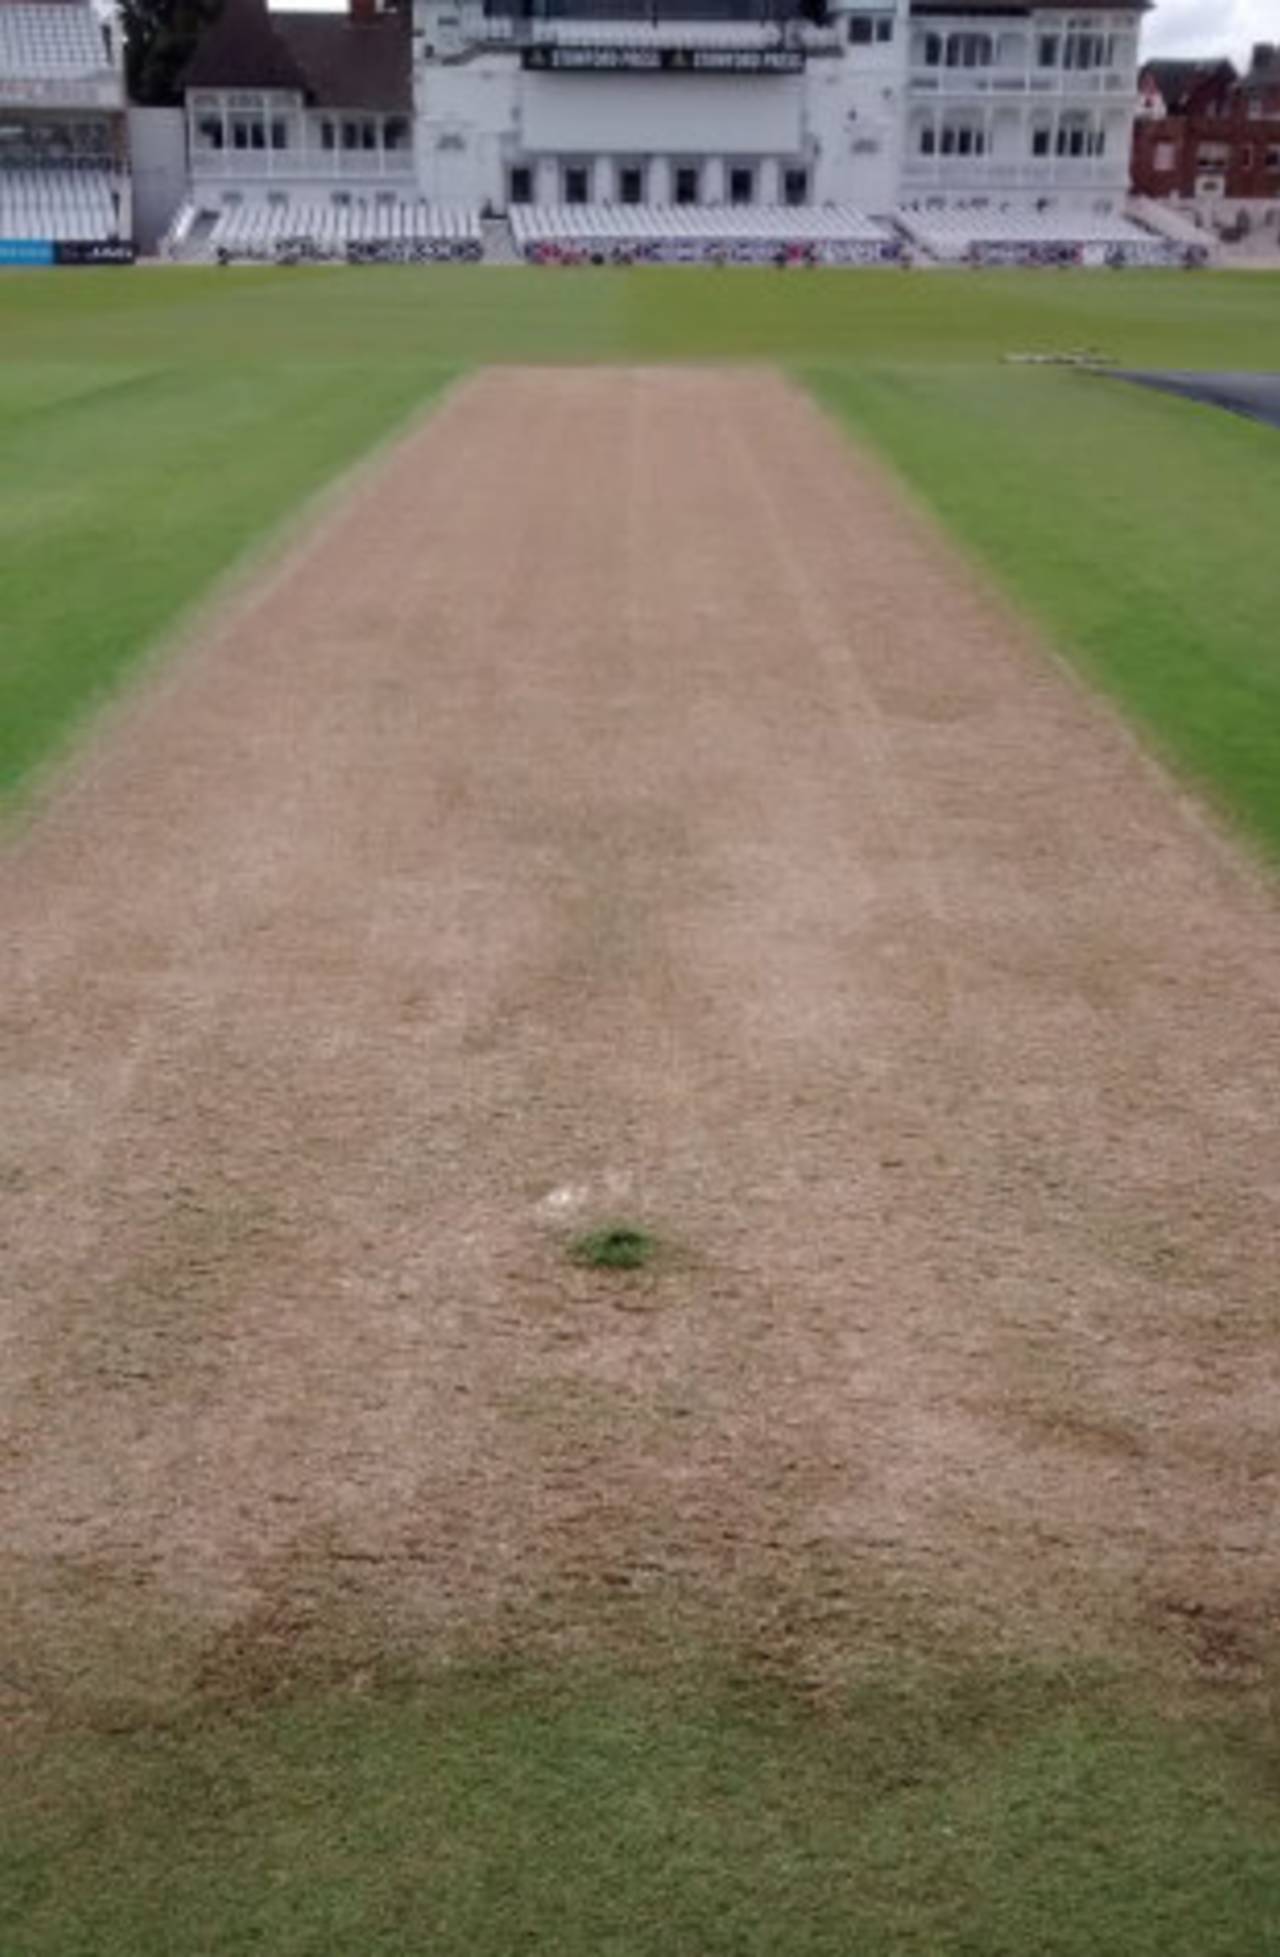 The Trent Bridge pitch came in for criticism from the England team, among others&nbsp;&nbsp;&bull;&nbsp;&nbsp;ESPNcricinfo Ltd/Sidharth Monga